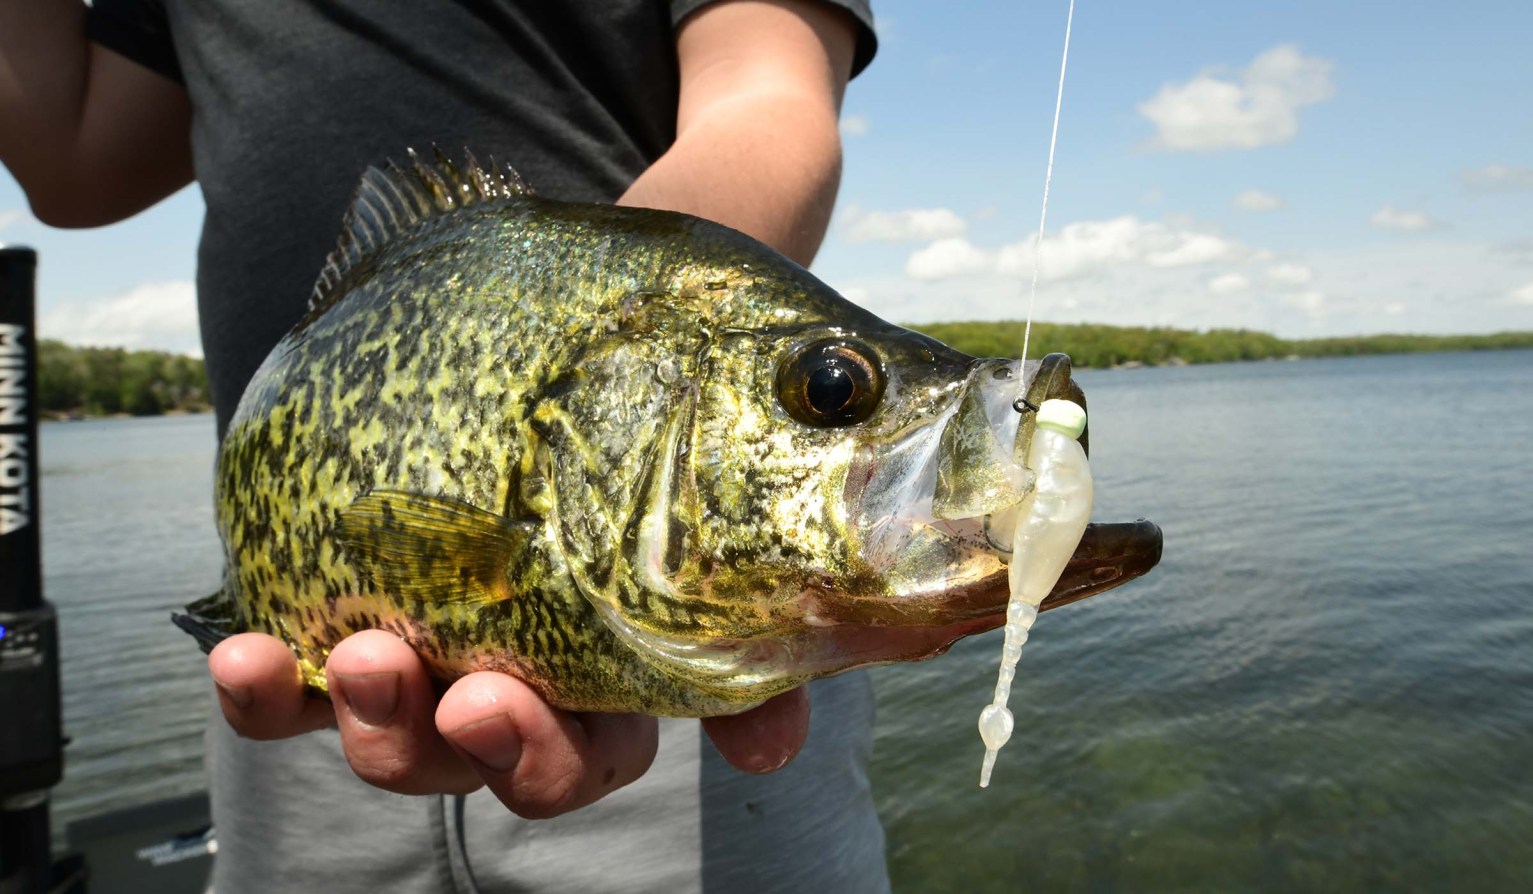 The Best Fishing Lines for Crappie: Braid, Mono, Copolymer, and